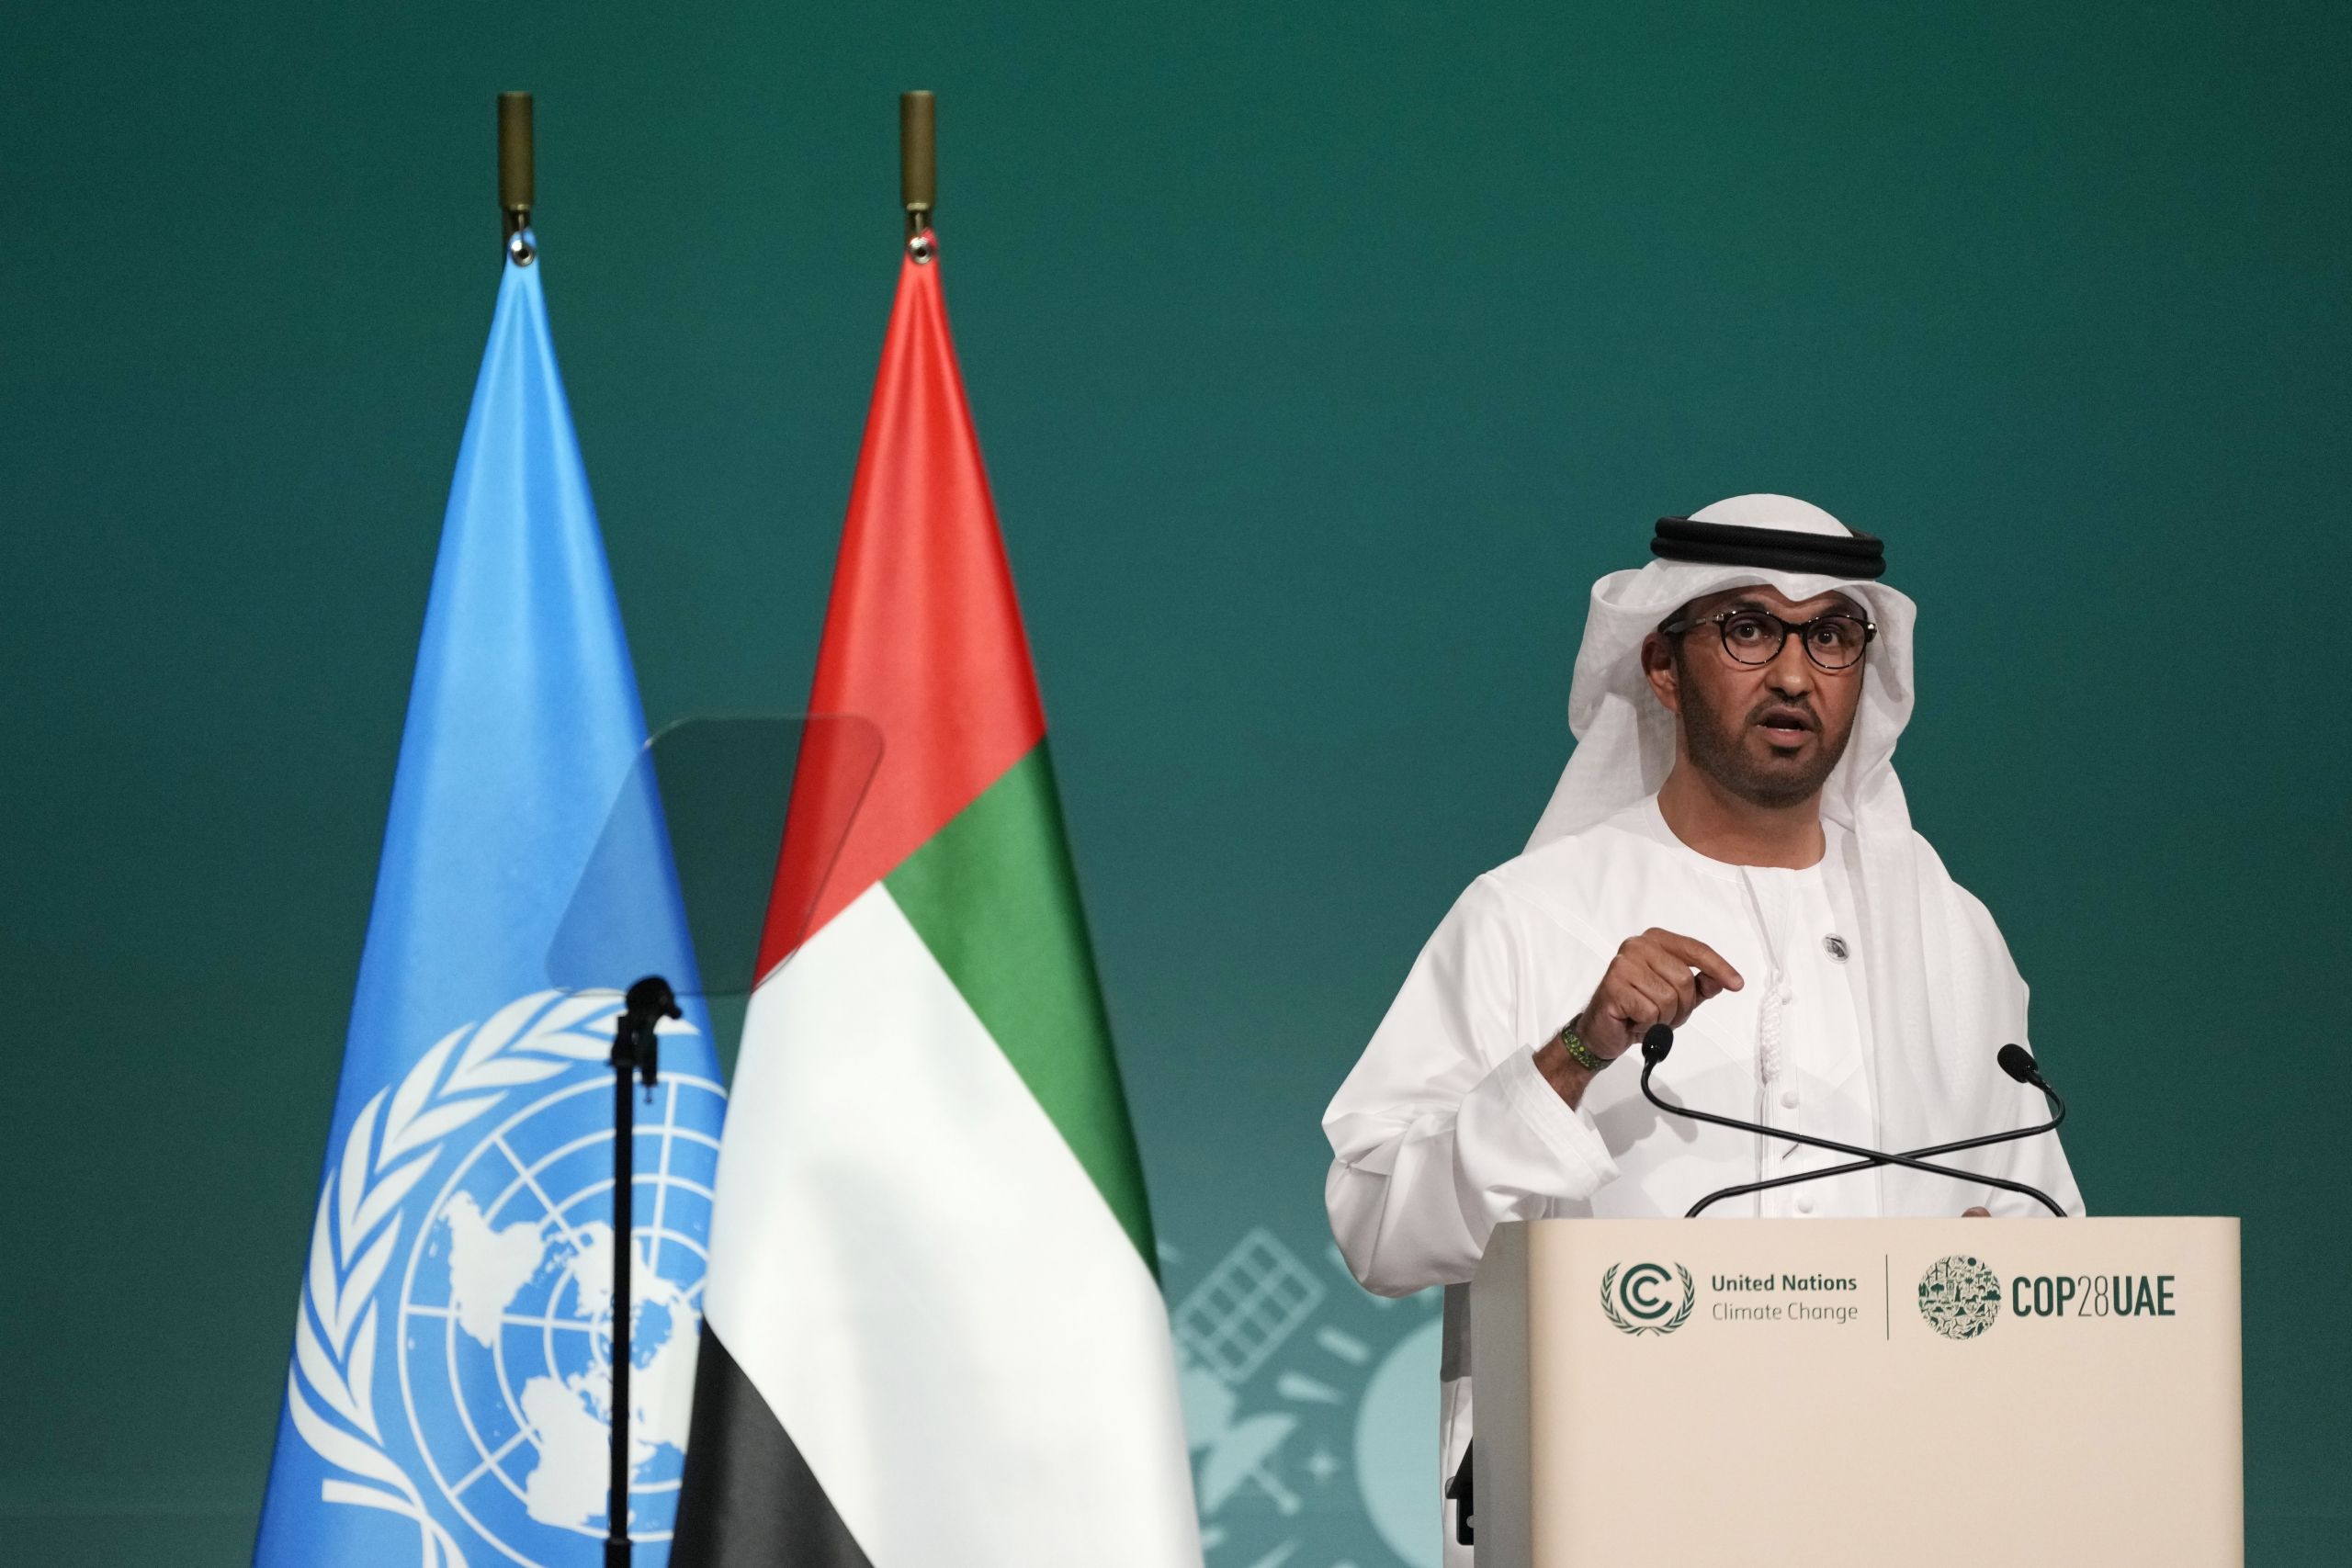 COP28 President Sultan al-Jaber speaks during the opening session at the COP28 U.N. Climate Summit, Thursday, Nov. 30, 2023, in Dubai, United Arab Emirates. (AP Photo/Peter Dejong)

Associated Press/LaPresse
Only Italy and Spain